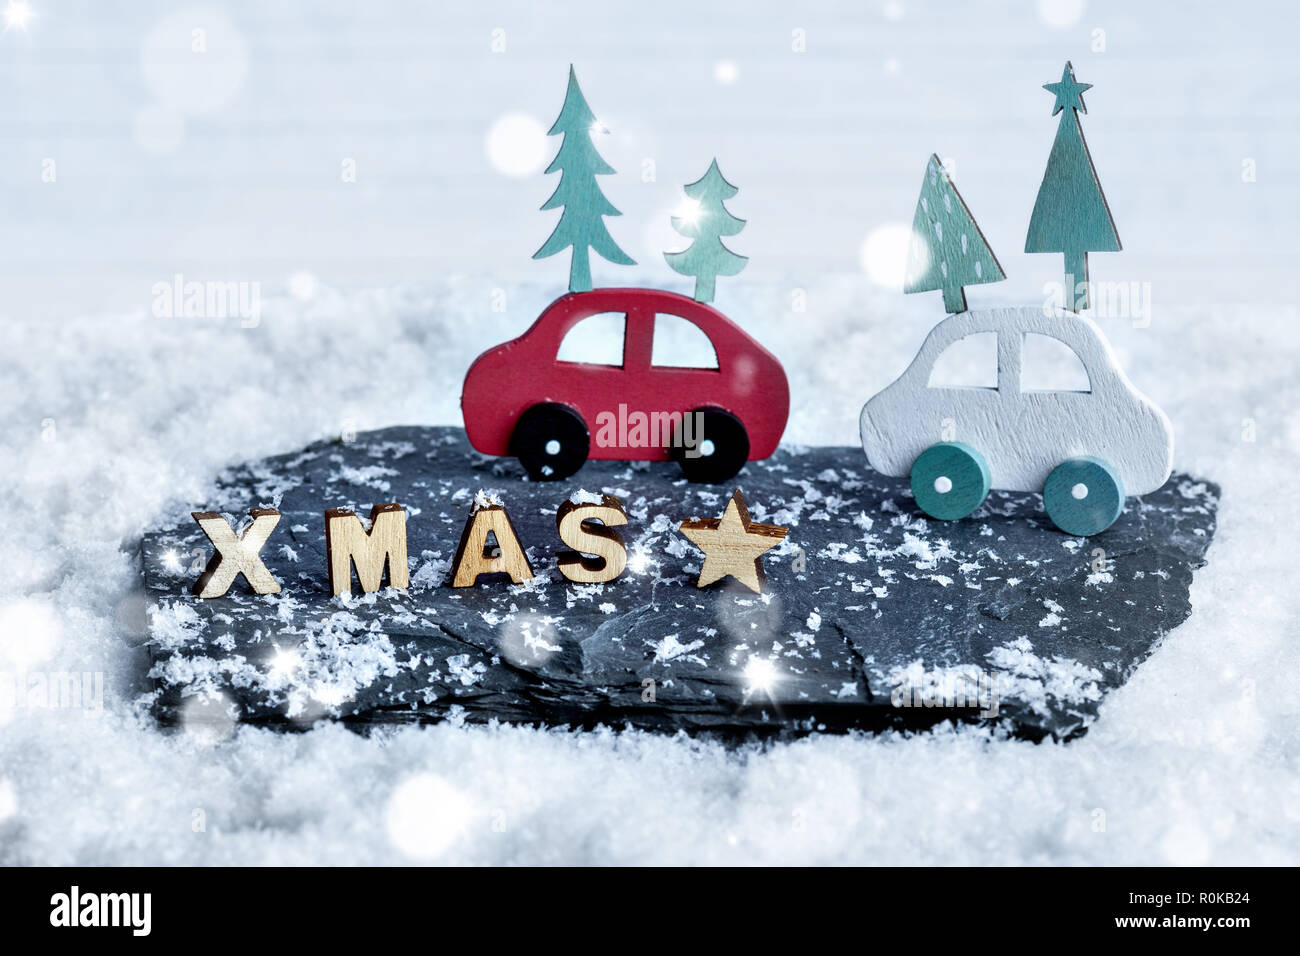 Christmas decoration of wooden XMAS letters and wooden cars in a snow scene Stock Photo